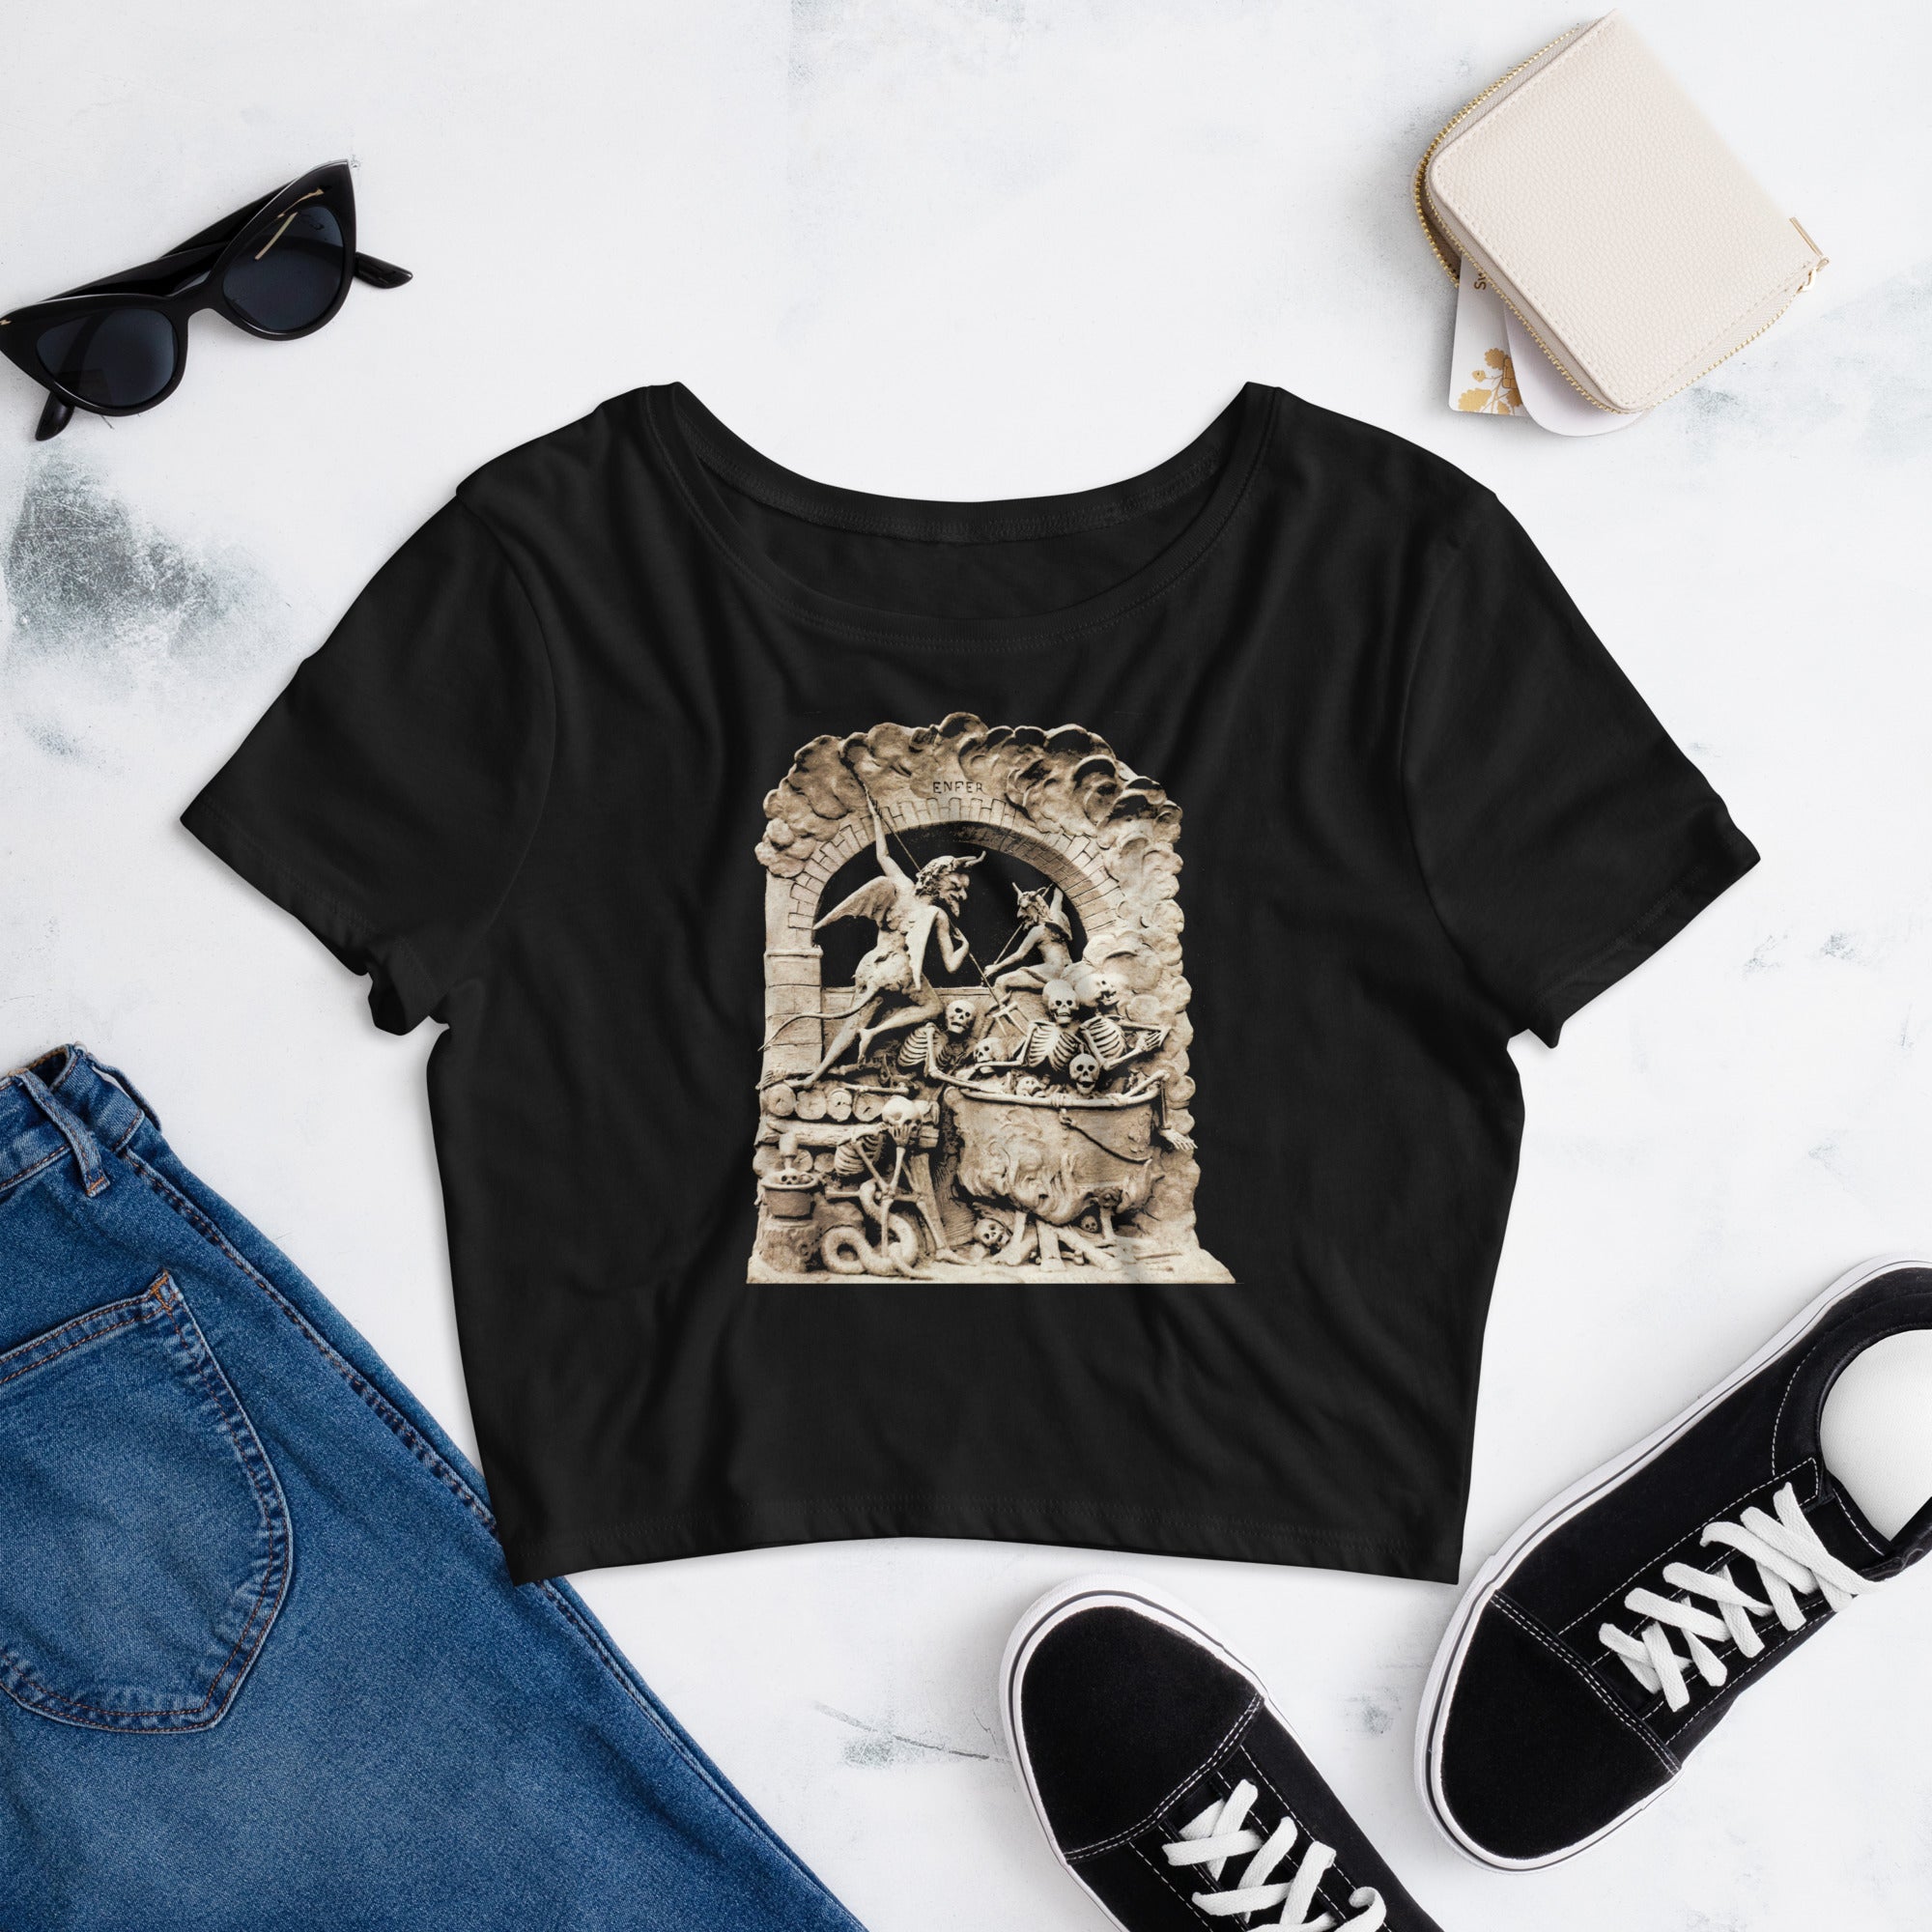 Les Diableries The Pits of Hell and the Devil Women’s Crop Tee - Edge of Life Designs